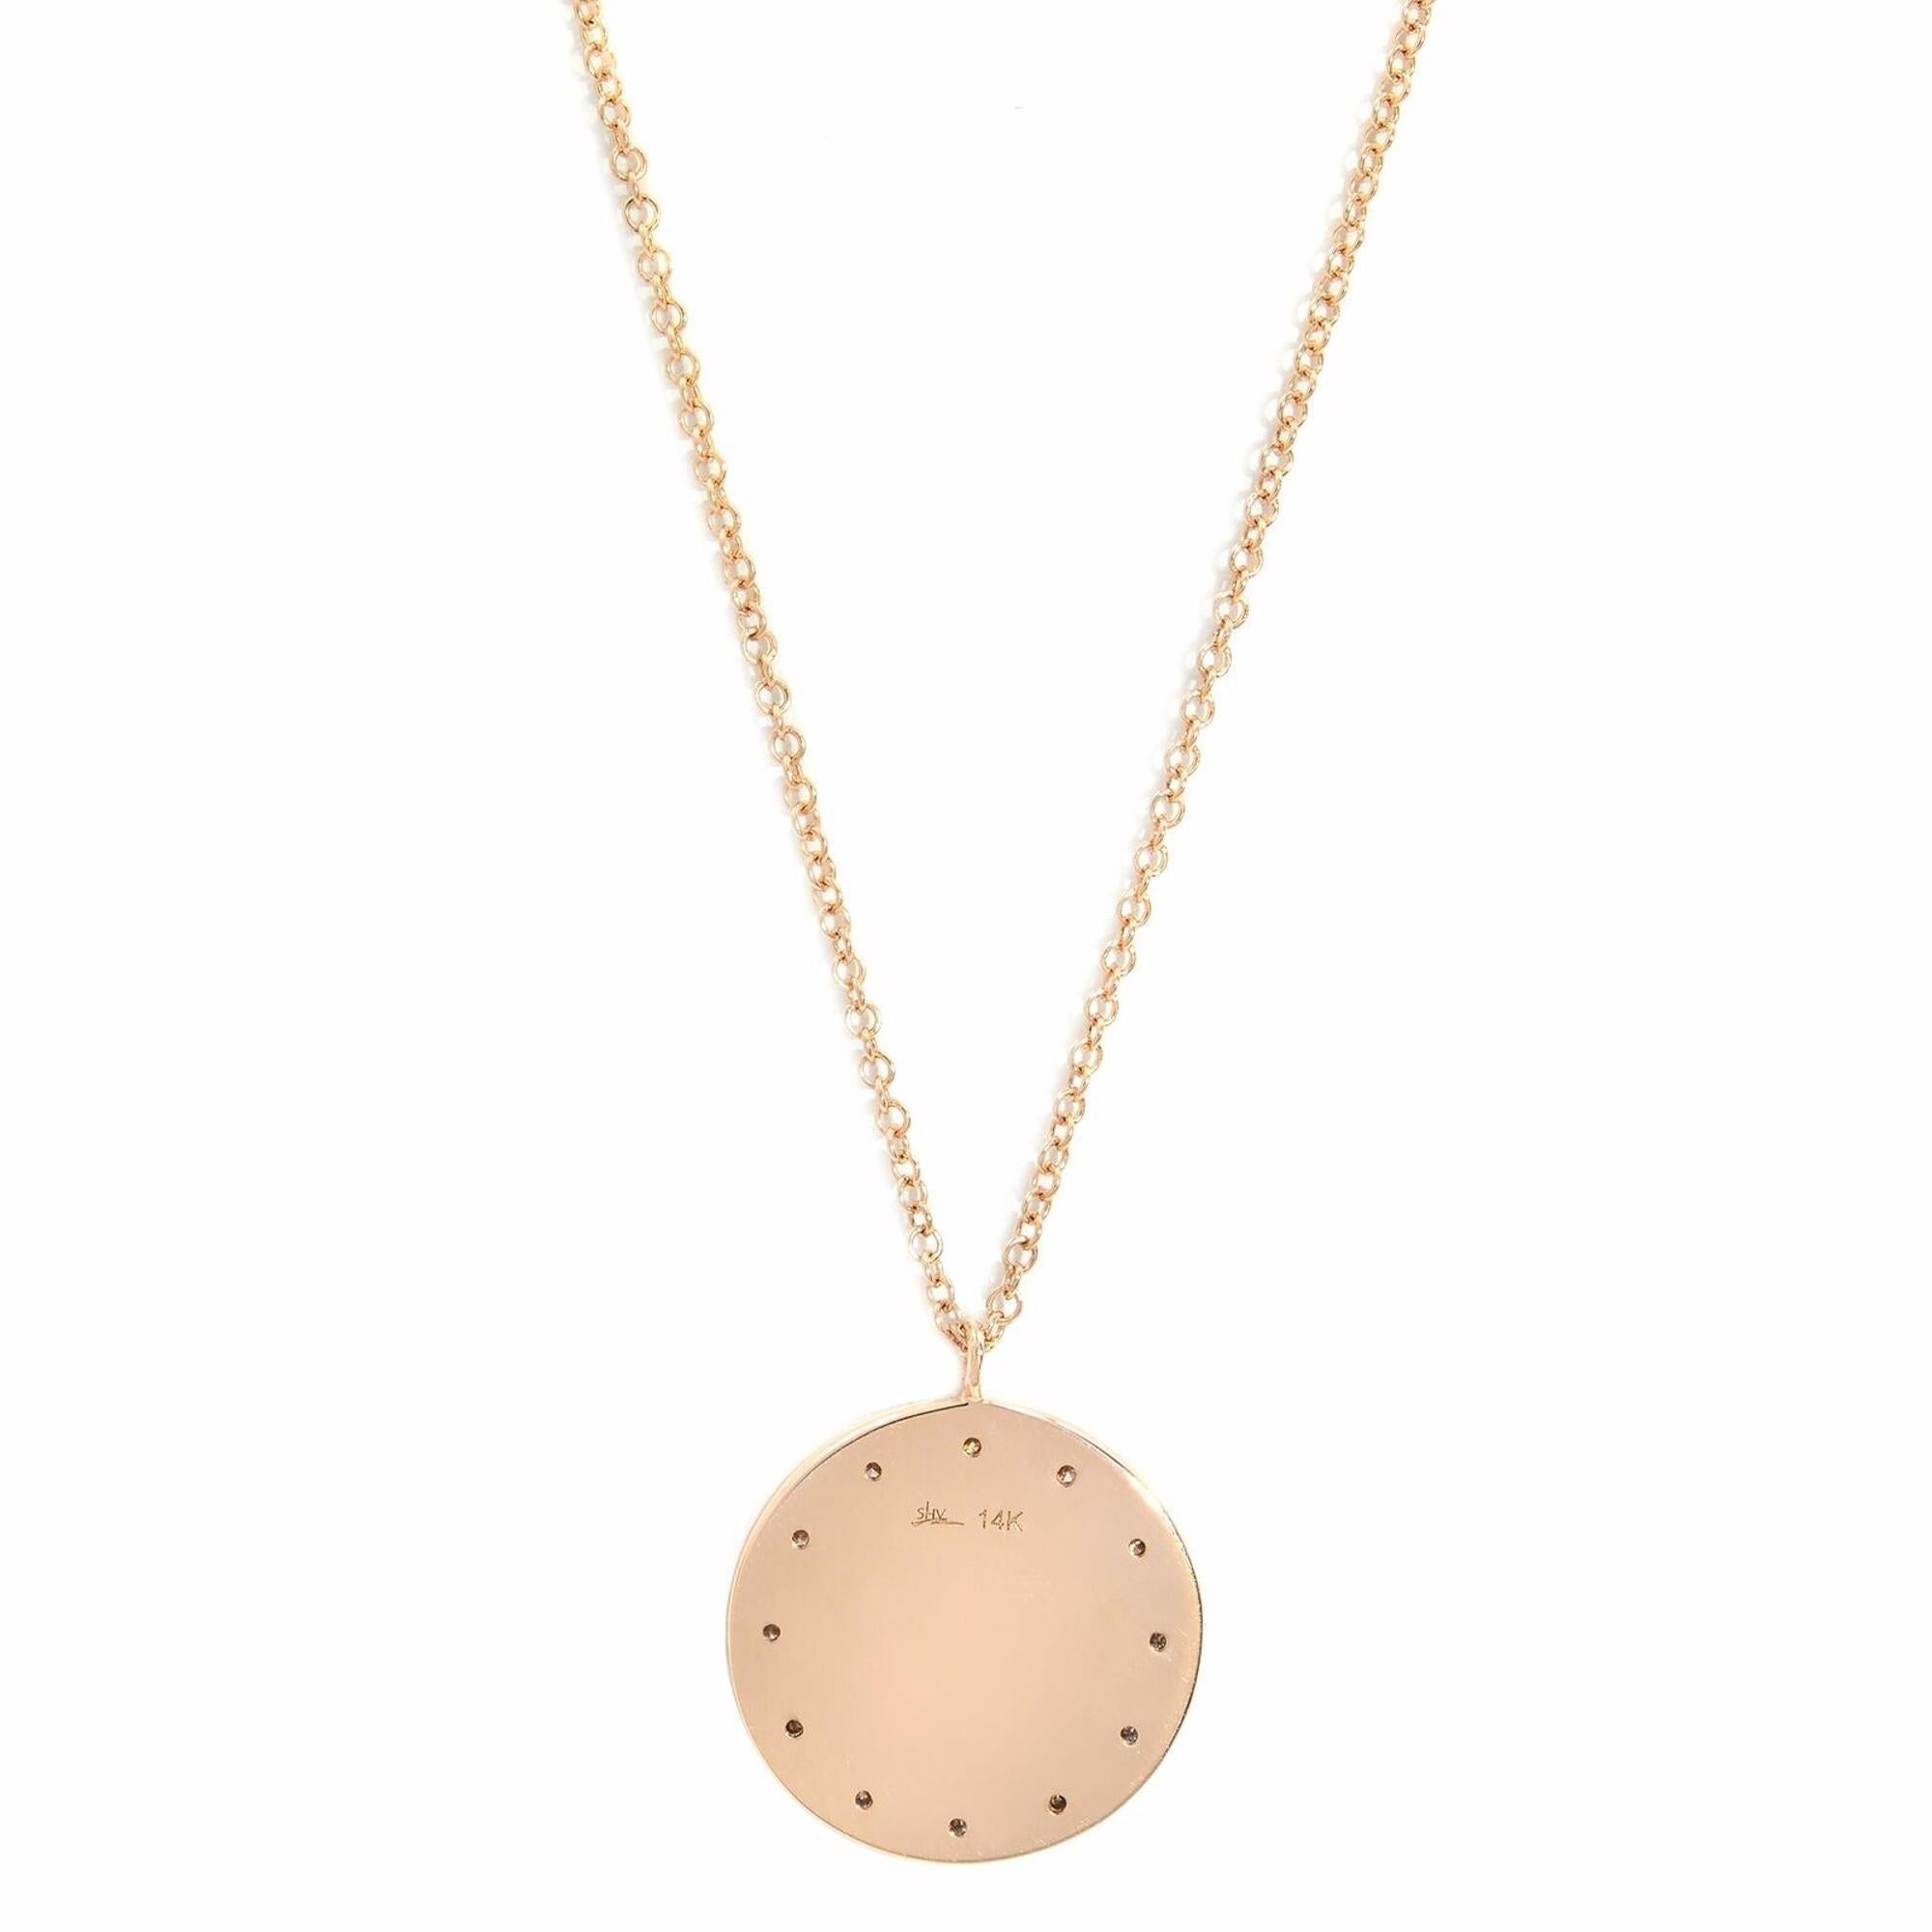 Rachel Koen Round Diamond Circle Disc Pendant Necklace 14K Rose Gold 0.09cttw In New Condition For Sale In New York, NY